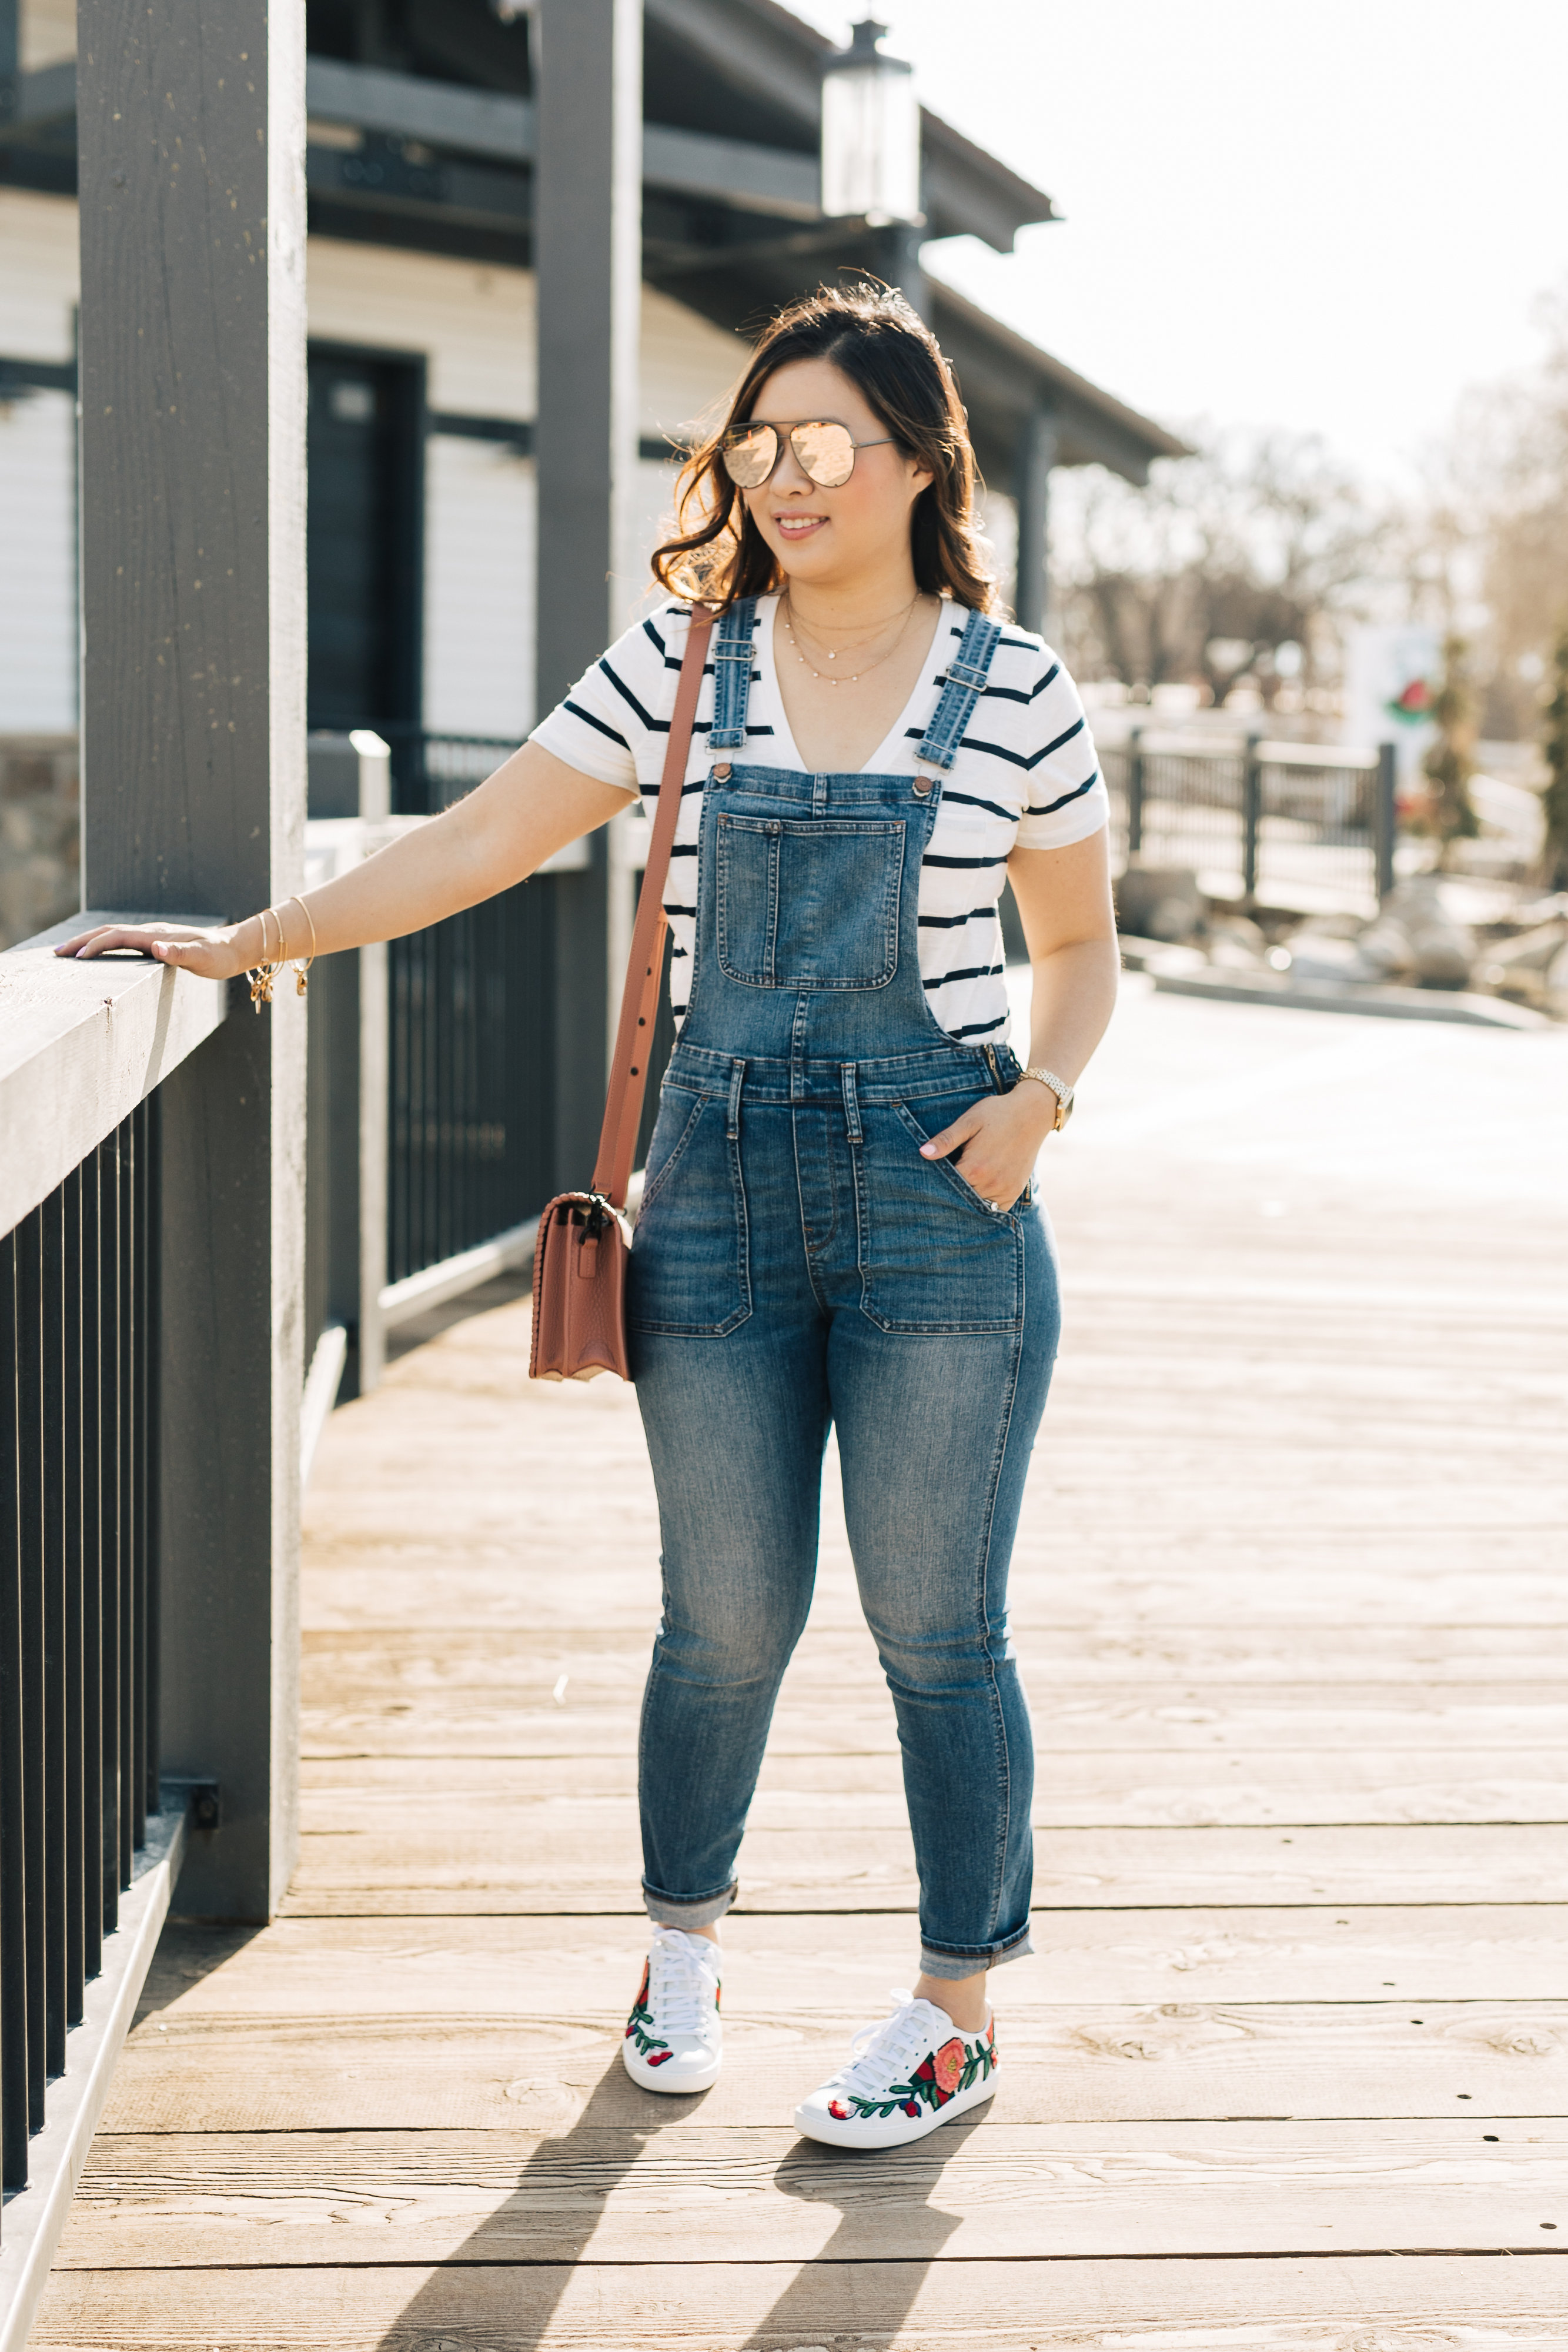 5 Chic Ways To Style Denim Overalls by popular Utah style blogger Sandy A La Mode